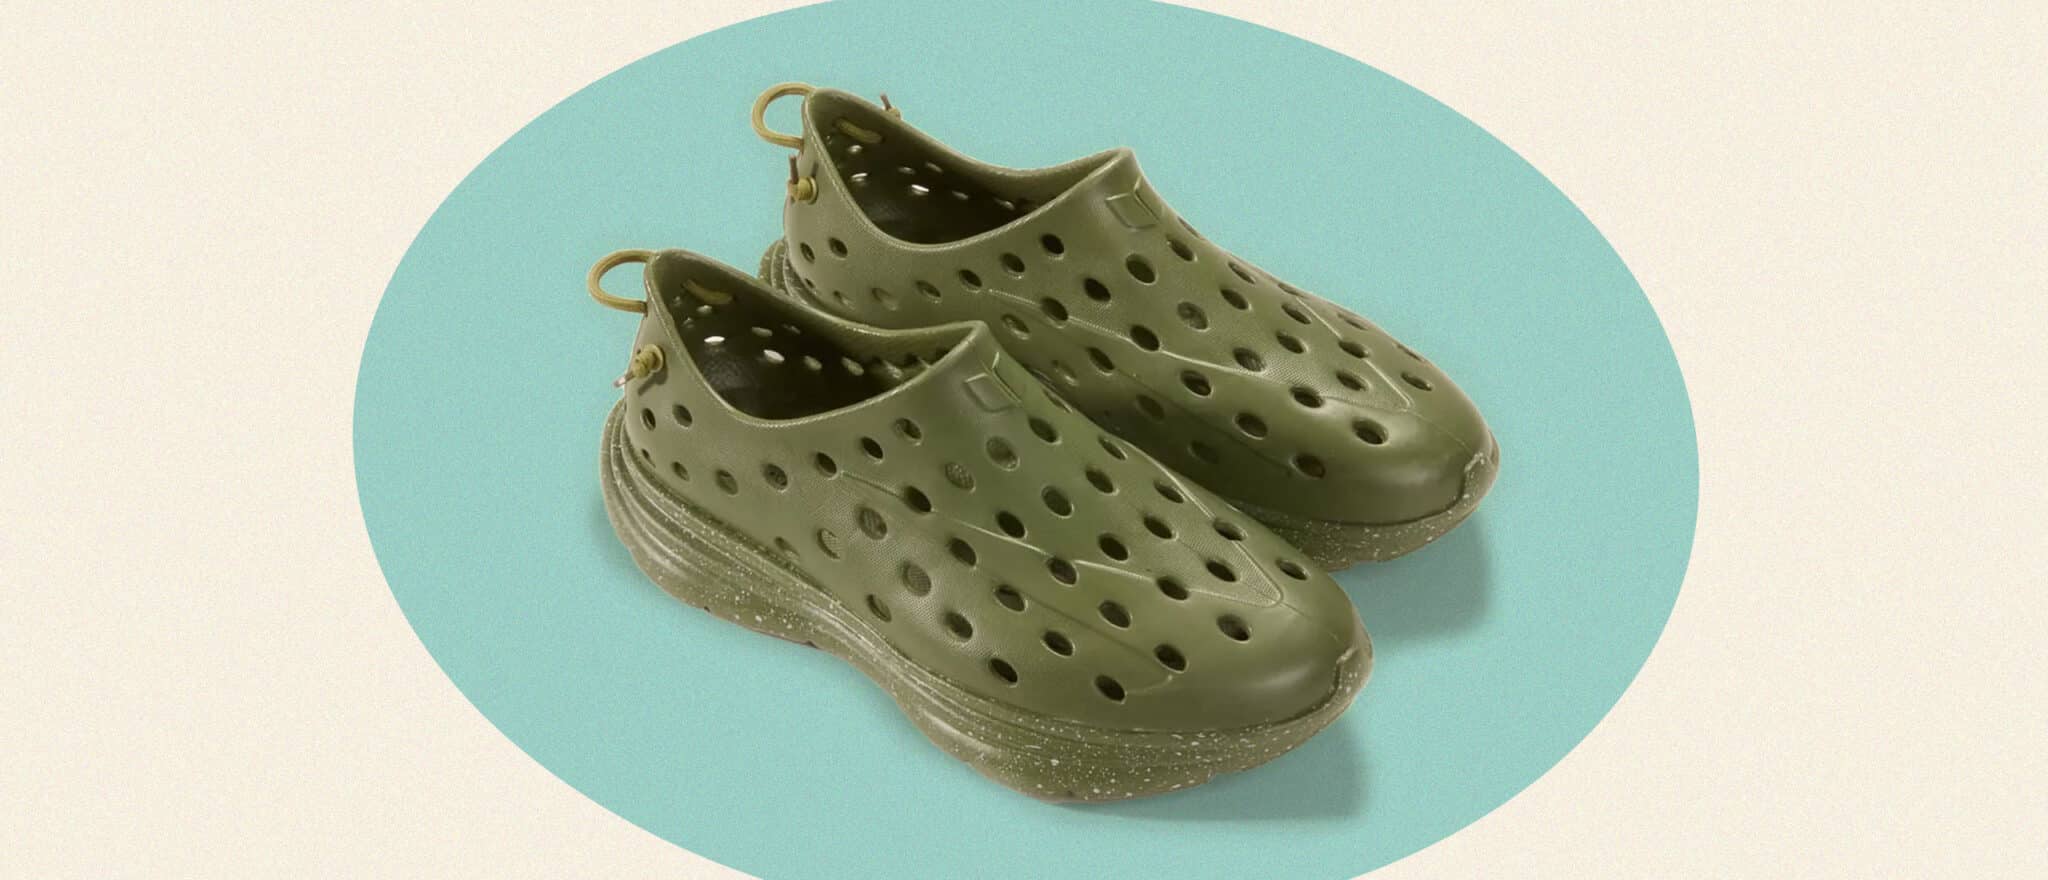 Can Fancy Crocs Help You Recover from Workouts Faster?